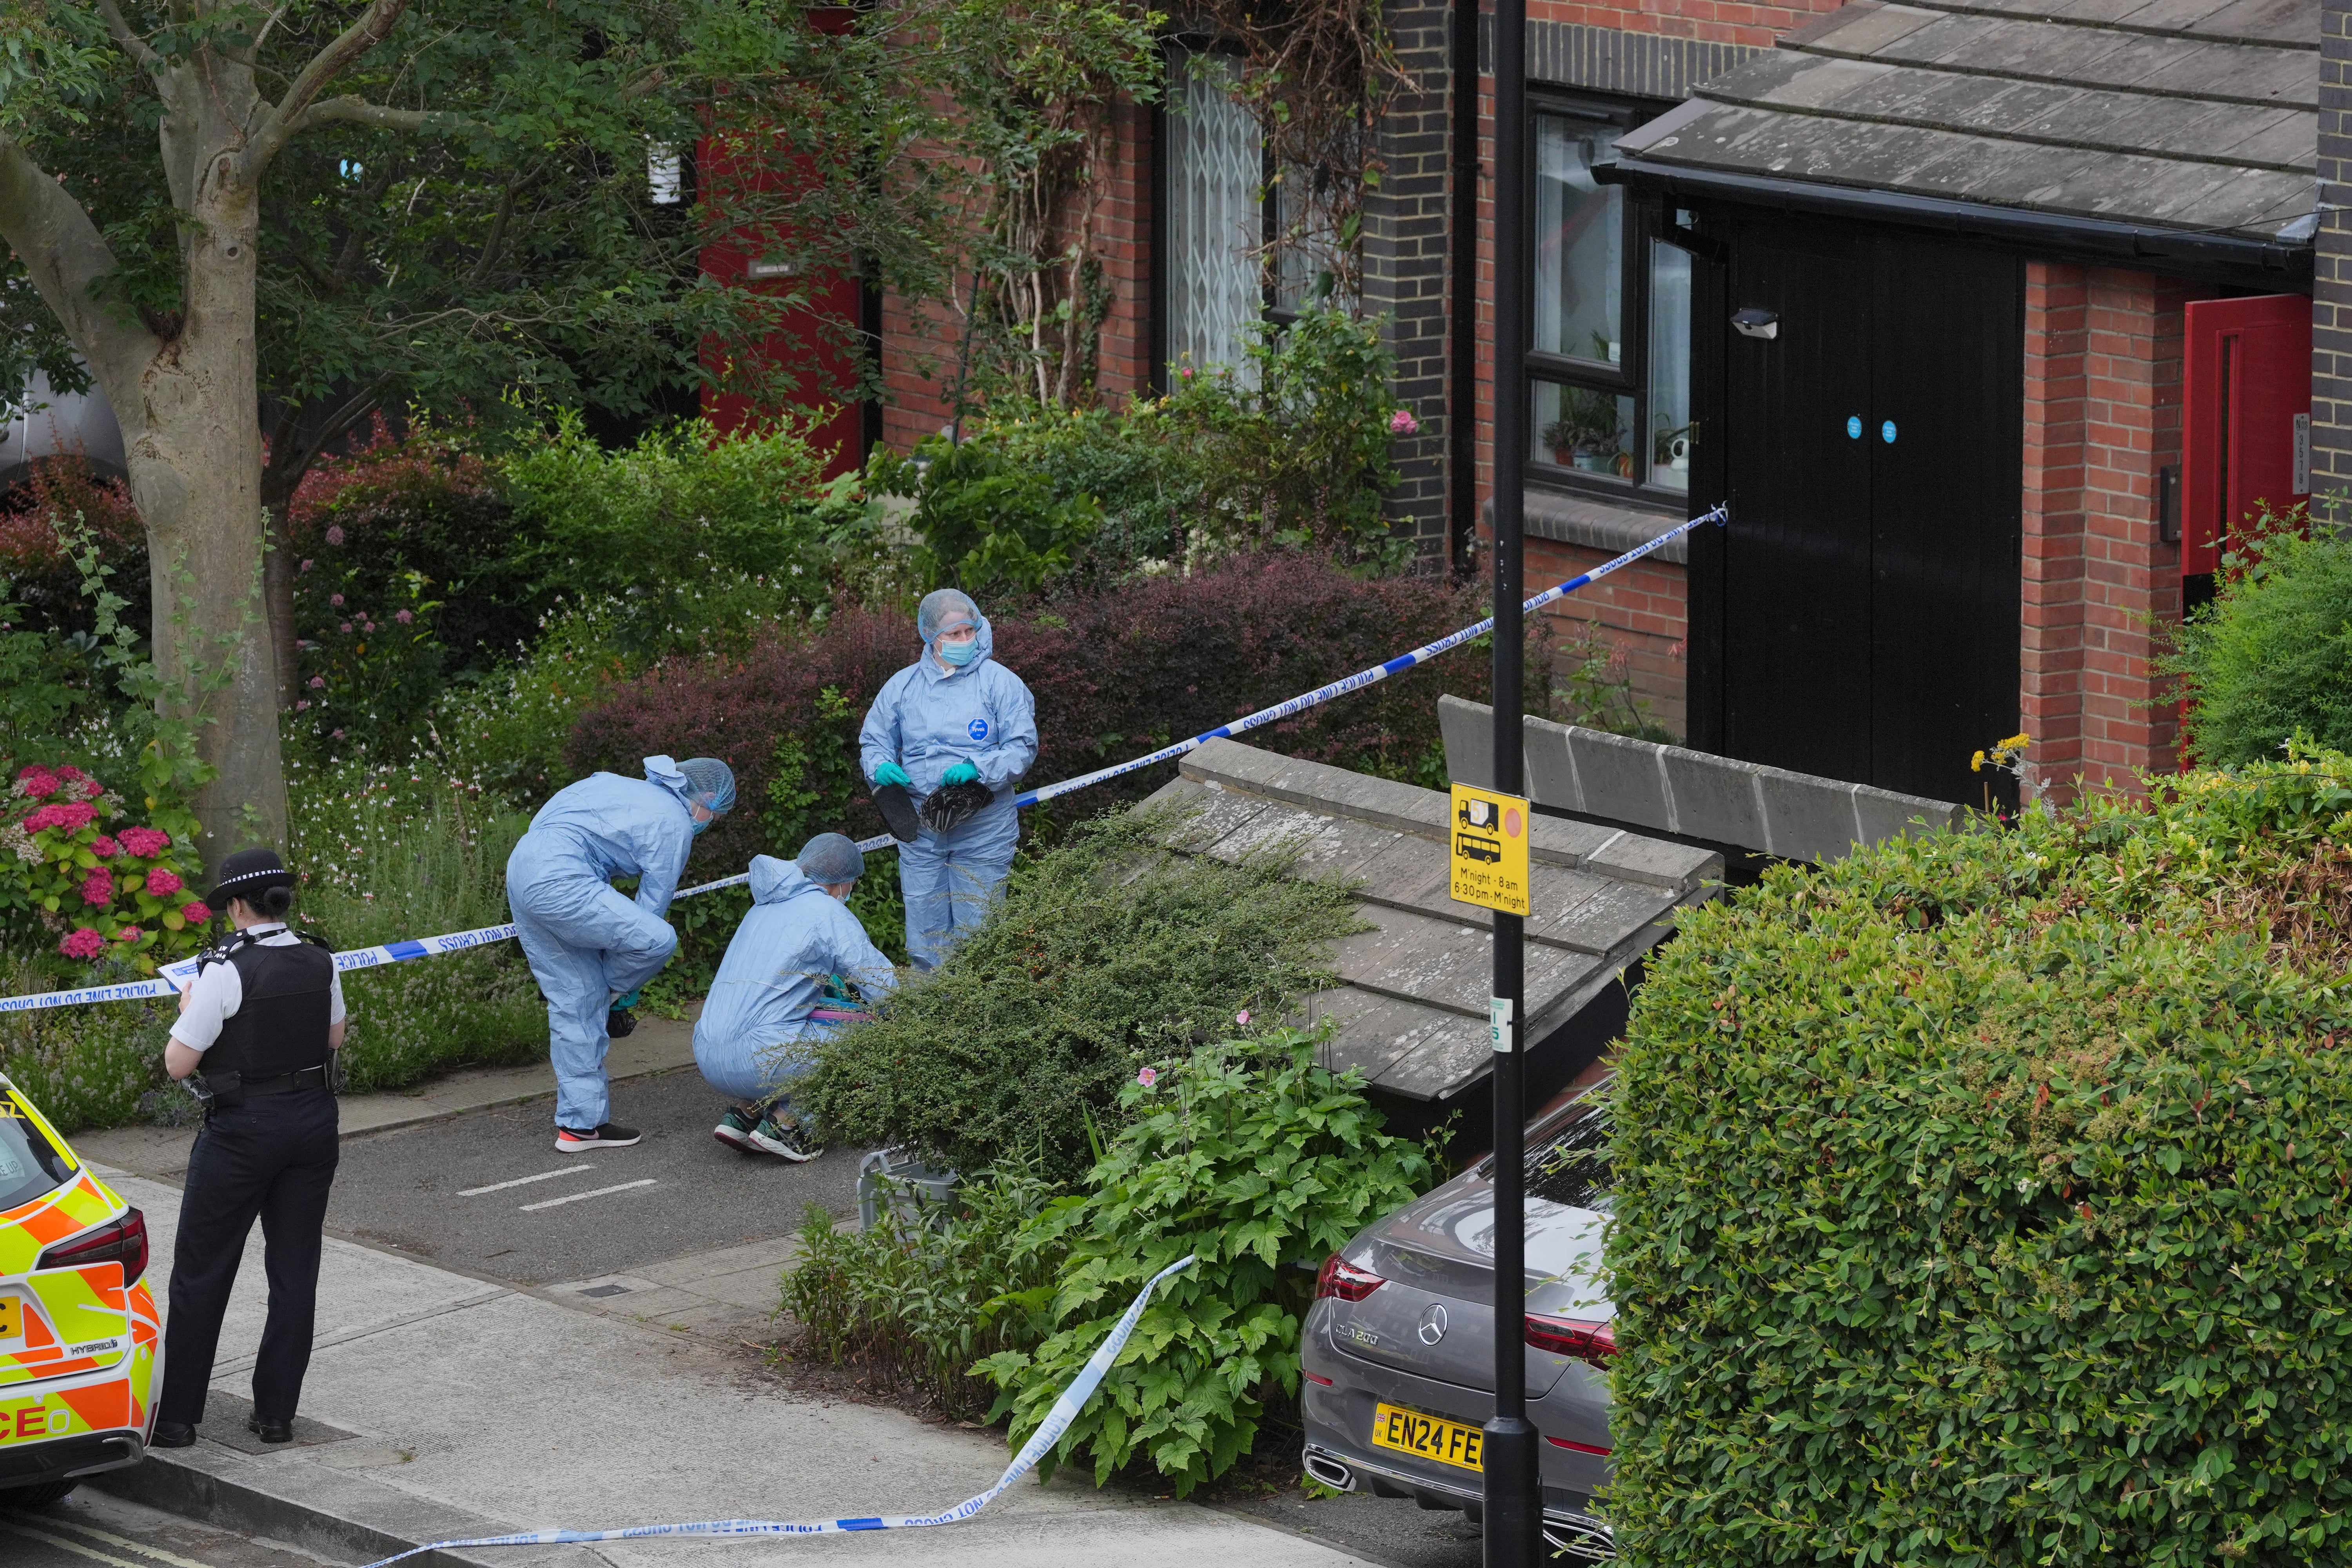 Police officers working in a crime scene at a property in Shepherd’s Bush, west London